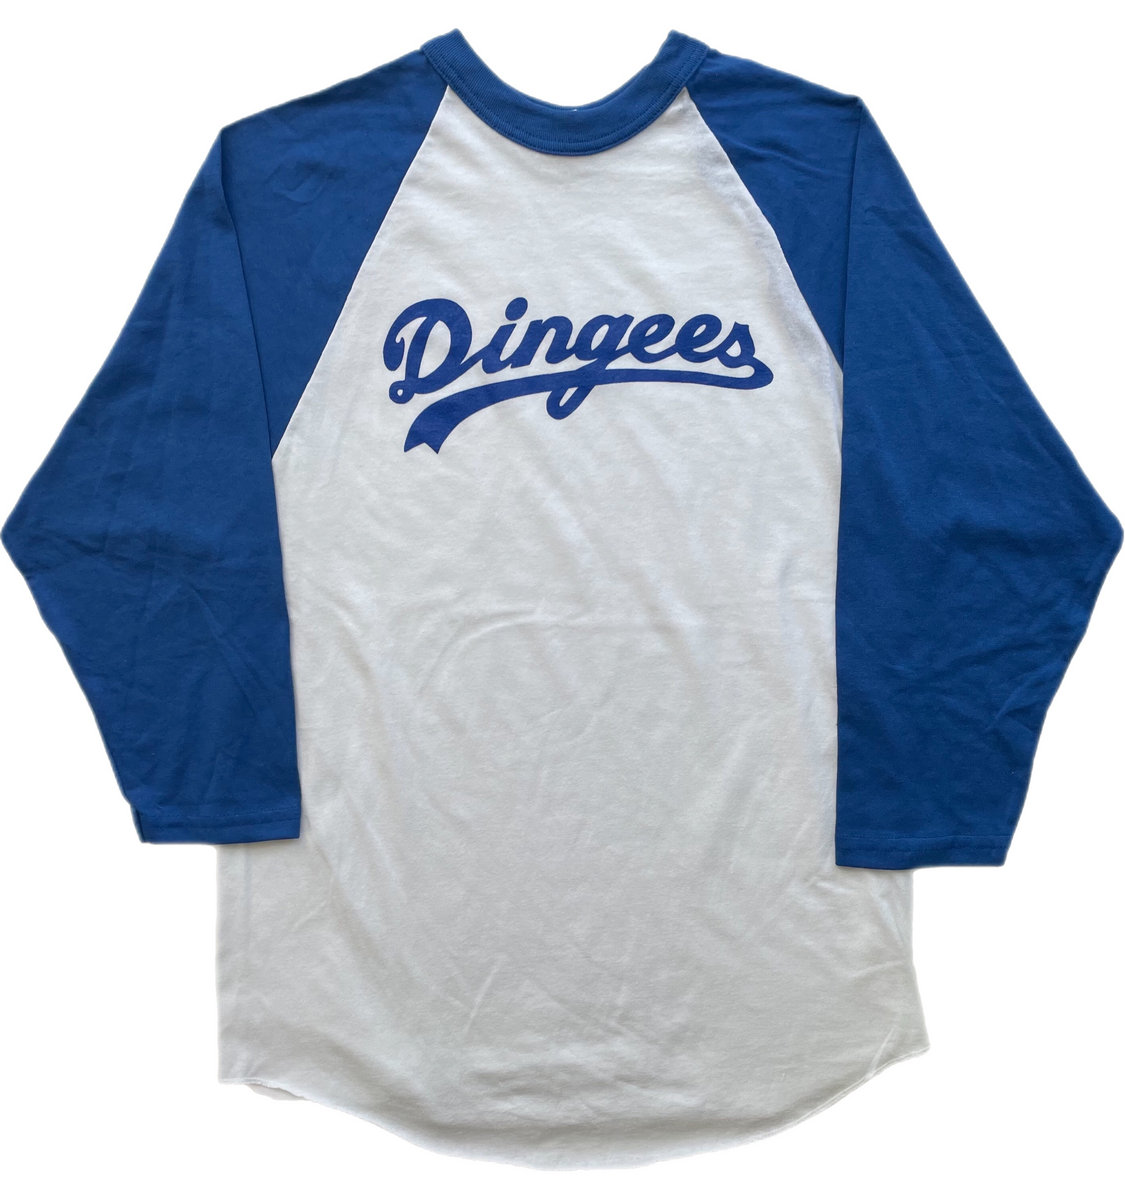 The Dingees 'Dodgers' 3/4 sleeve T-shirt